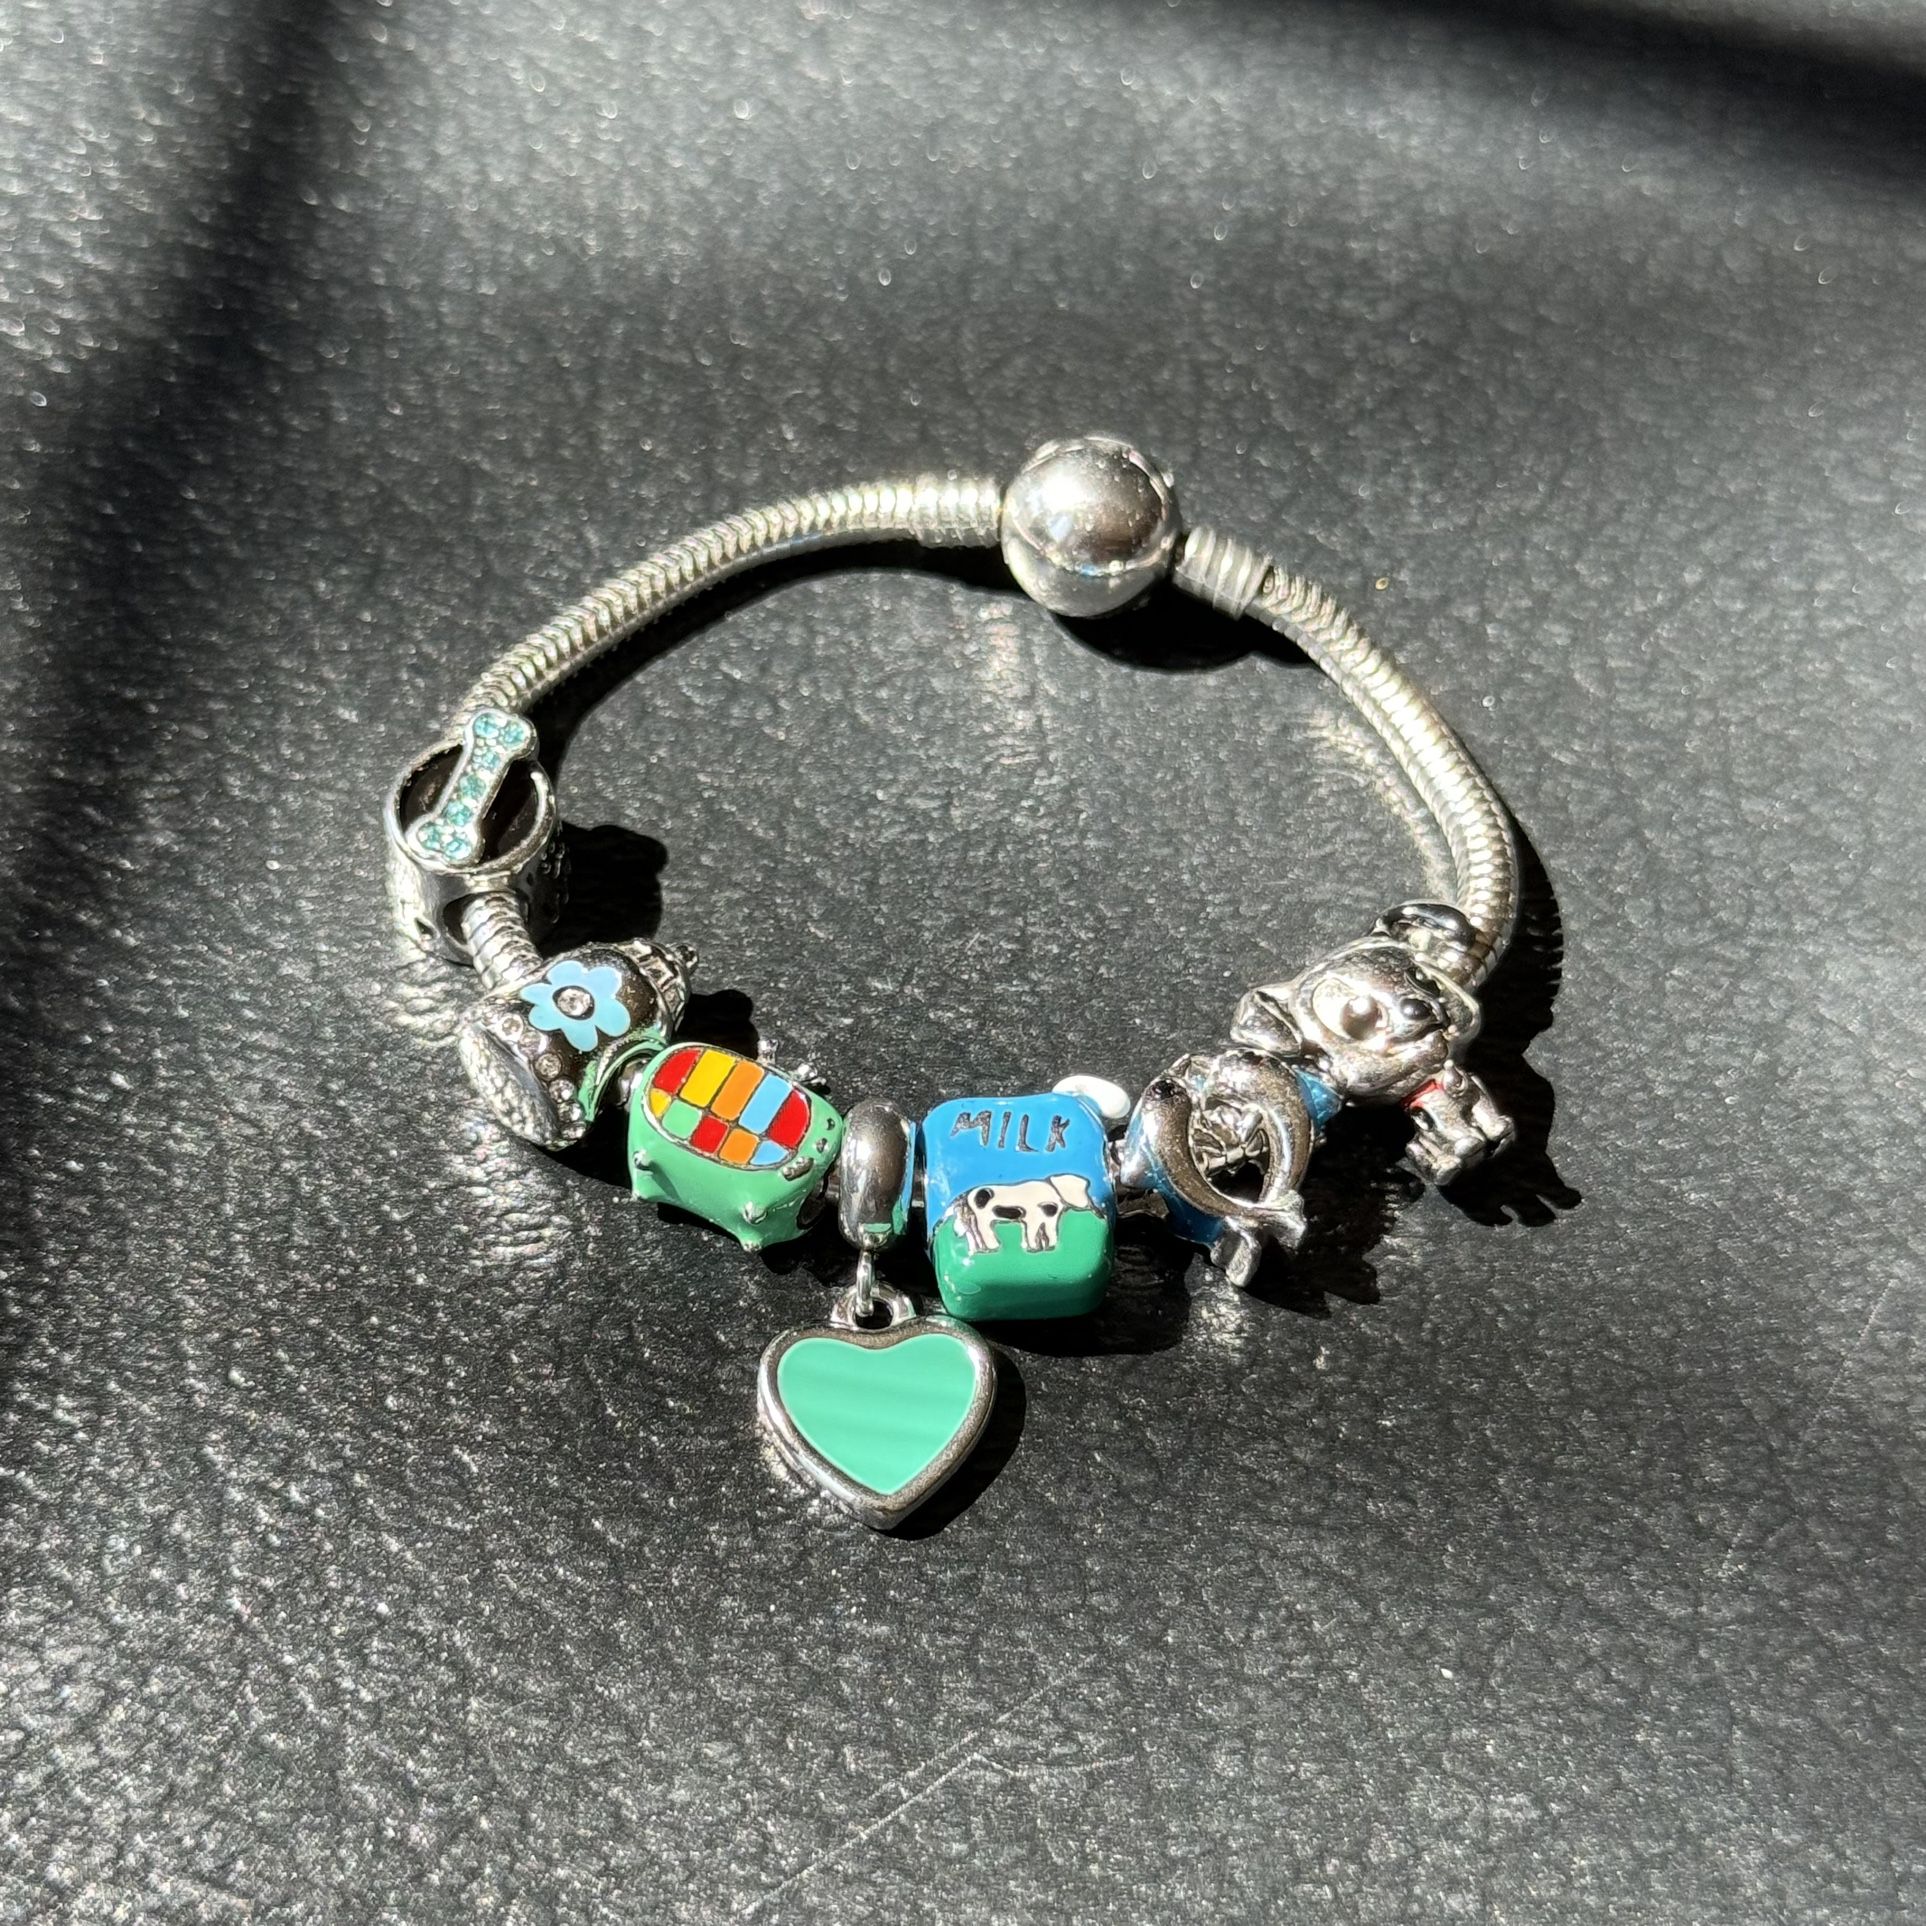 girls teal bracelet with charm all of stainless steel 16 cm